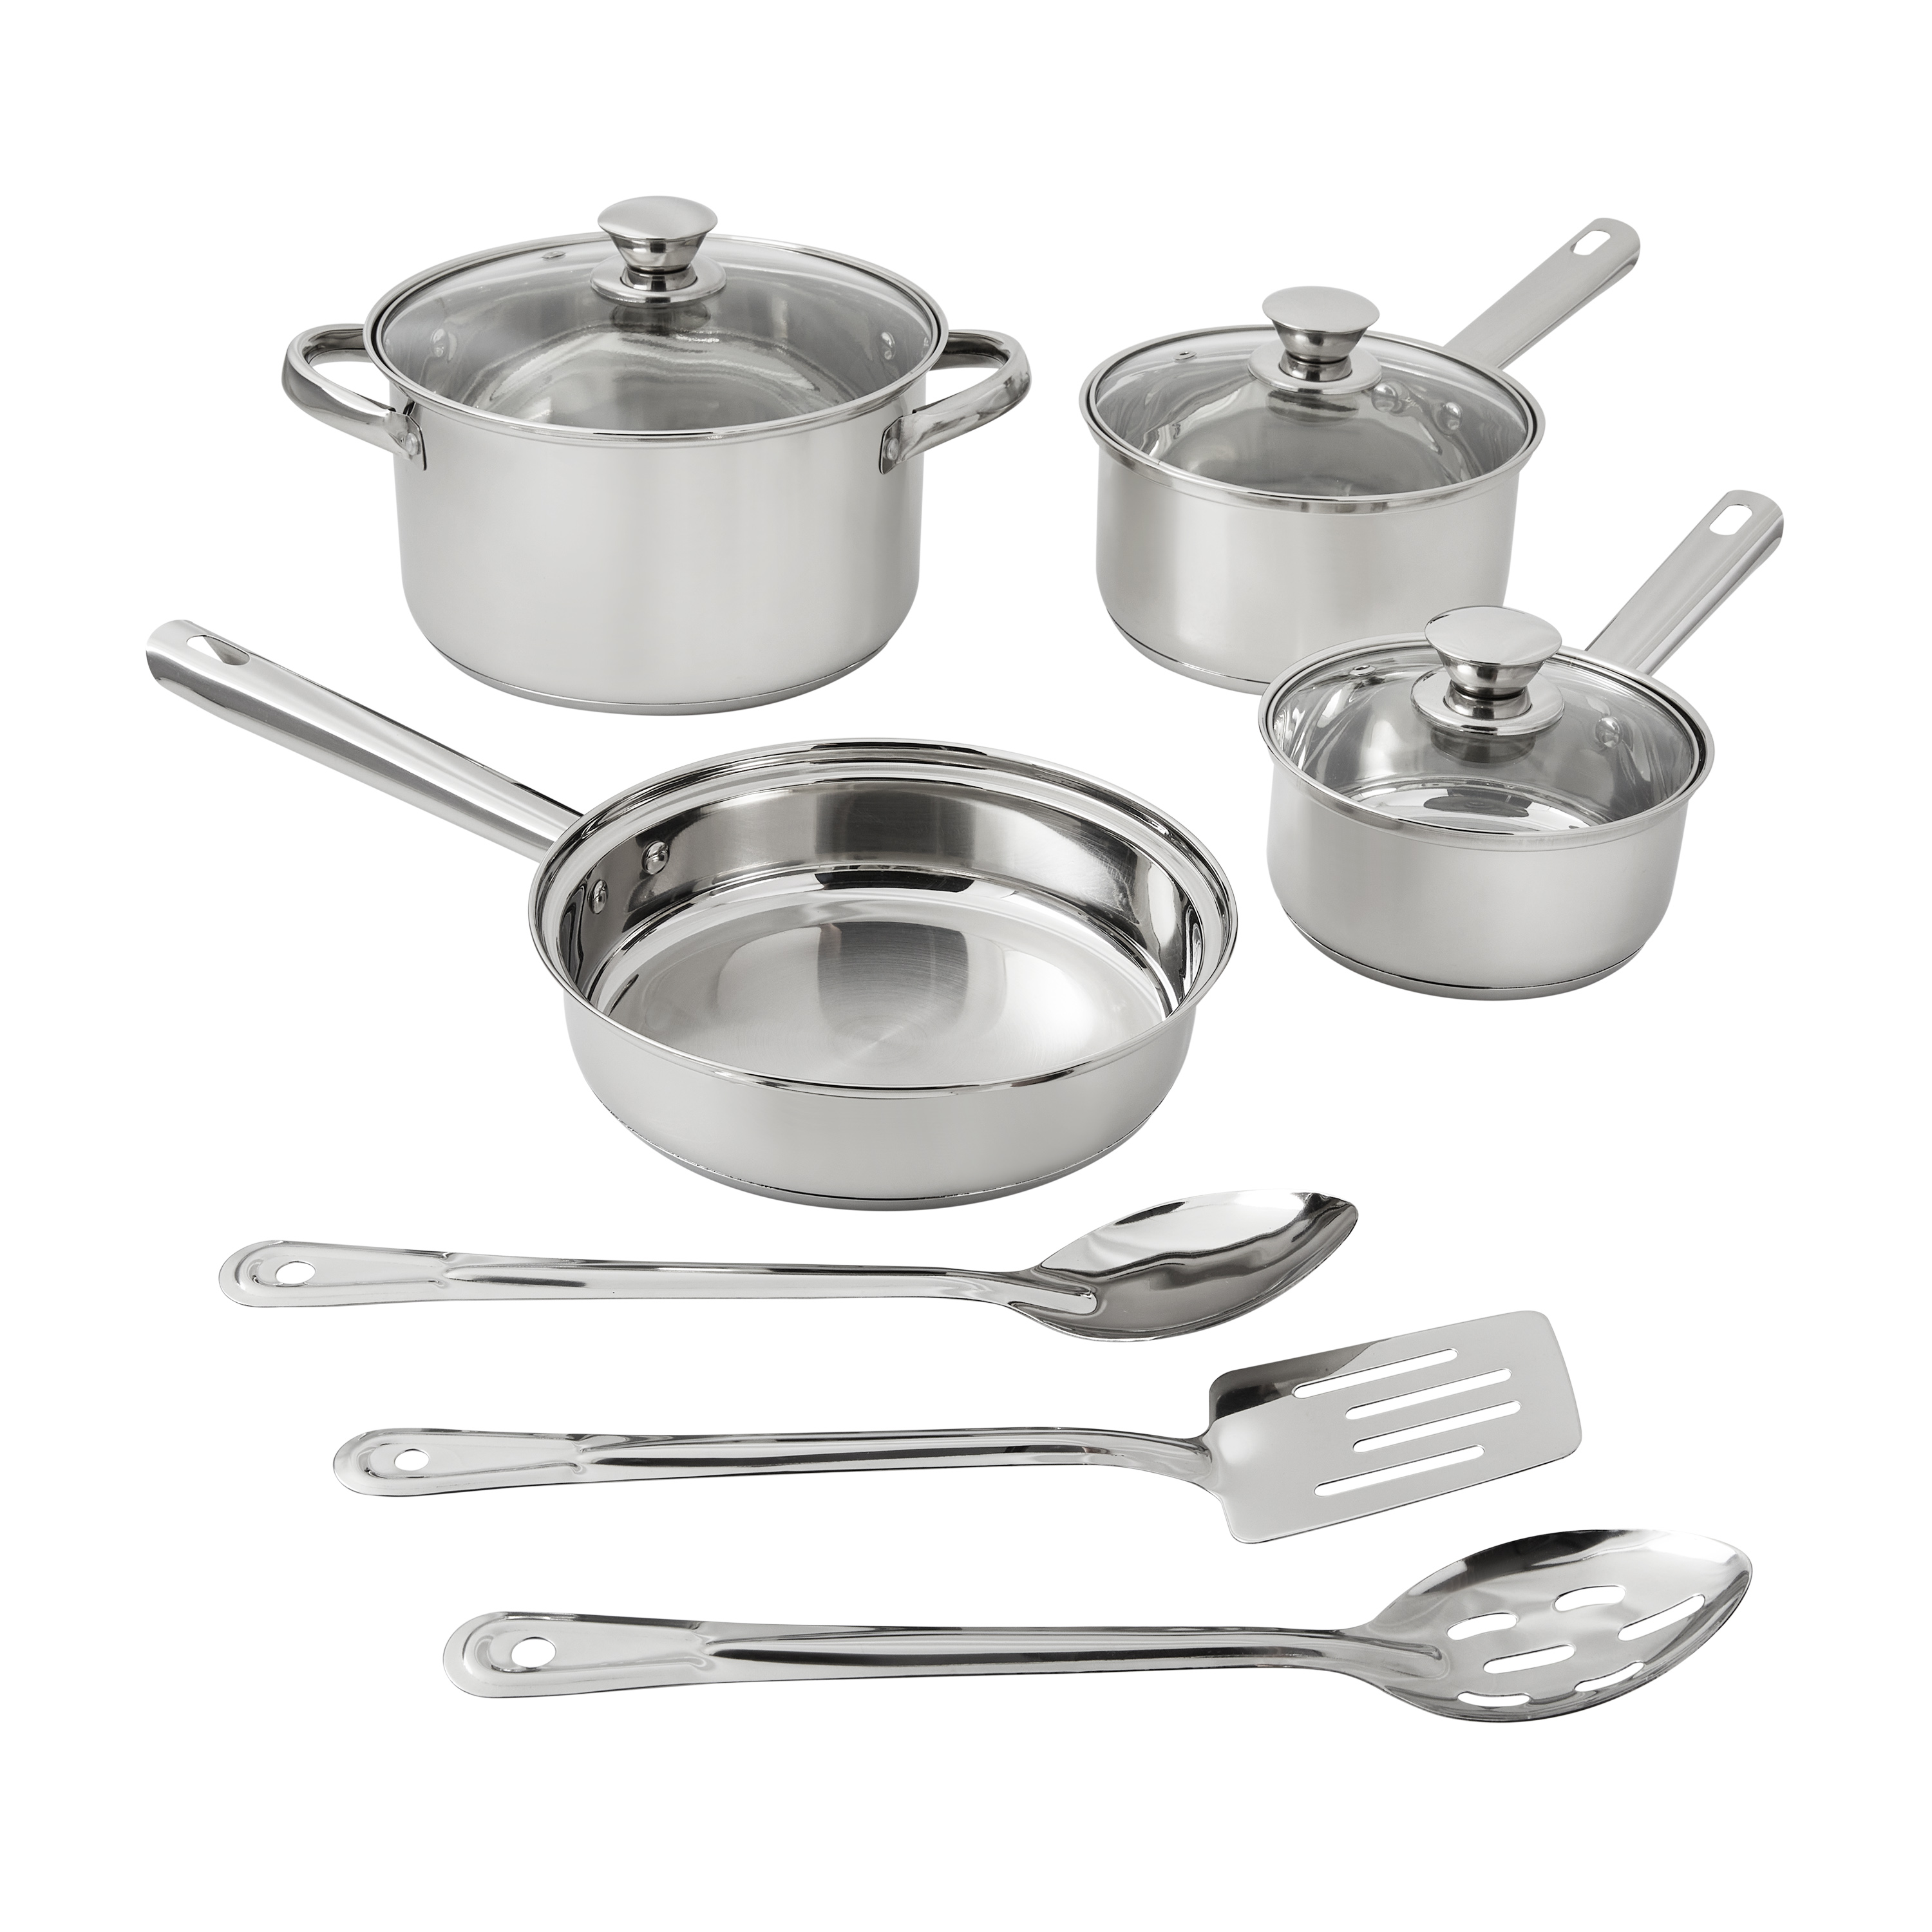 Mainstays Stainless Steel 10-Piece Cookware Set - image 1 of 8